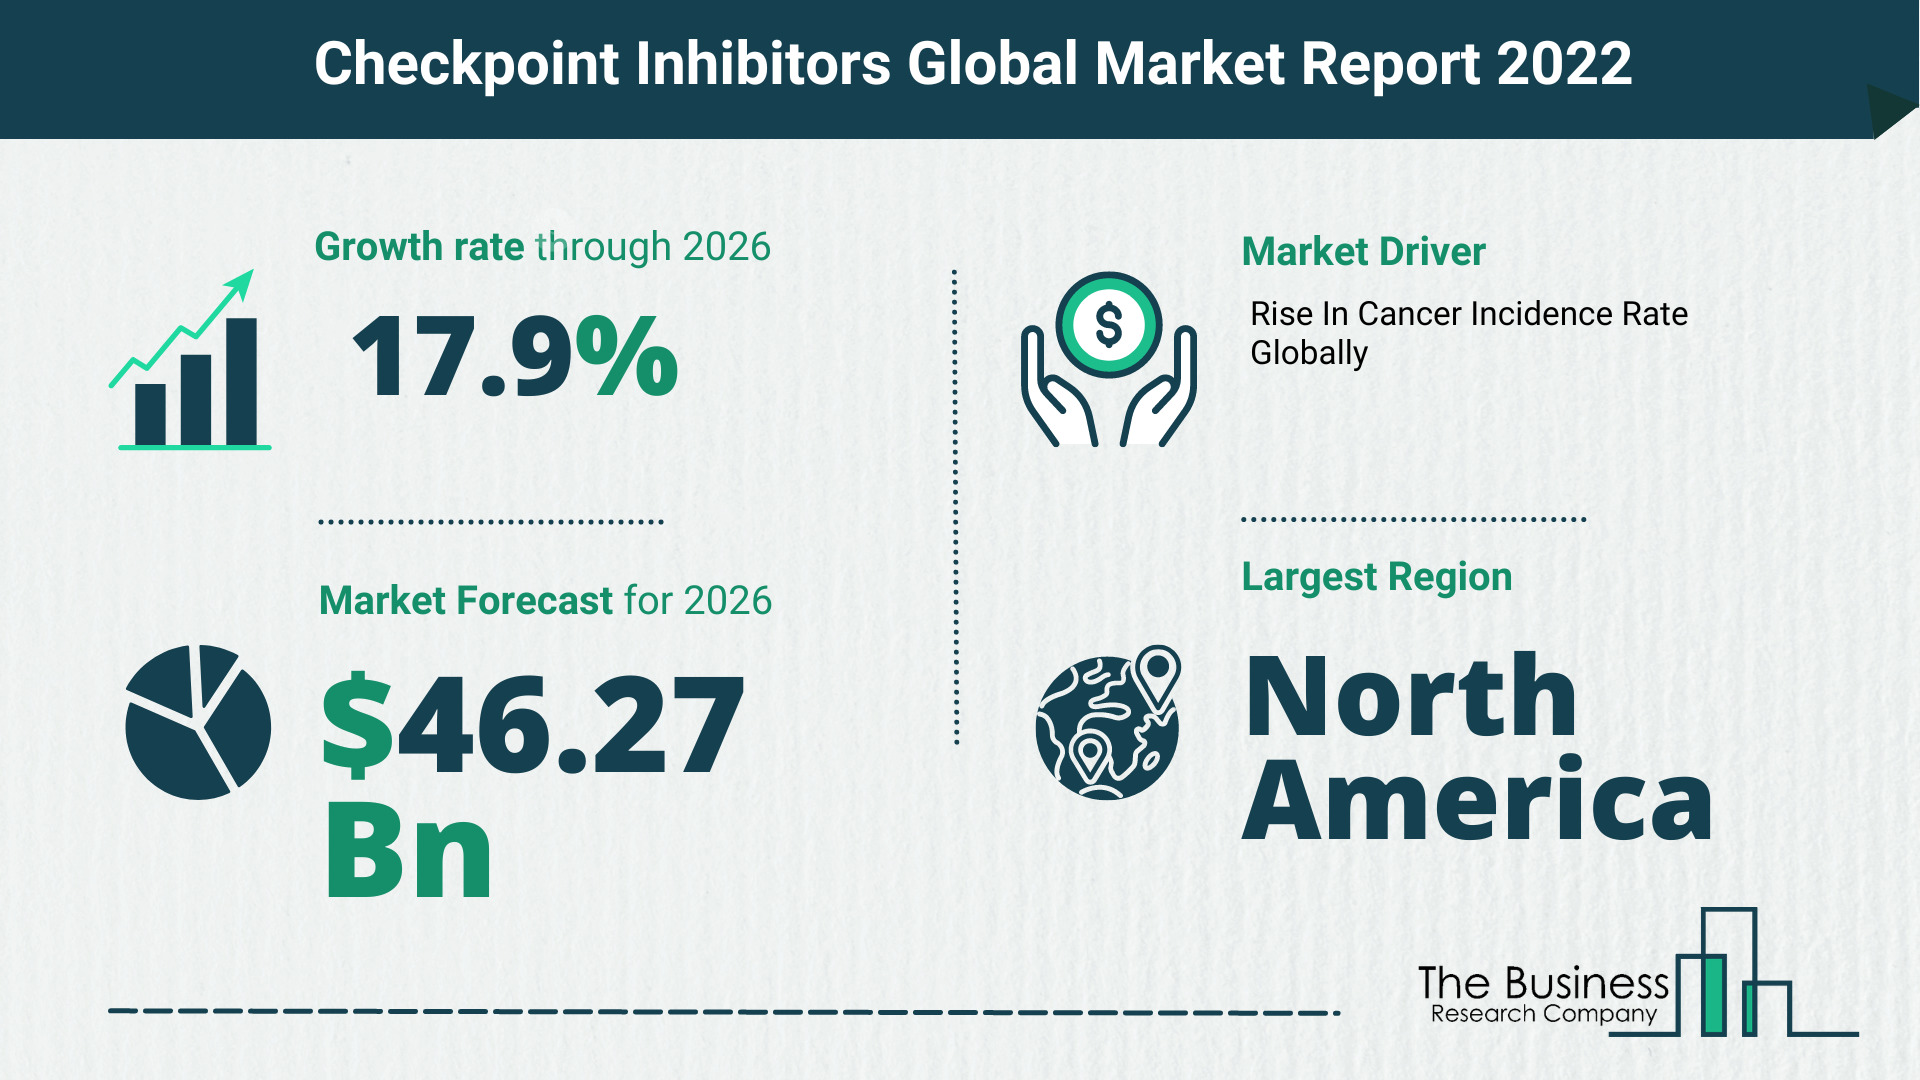 What Is The Checkpoint Inhibitors Market Overview In 2022?